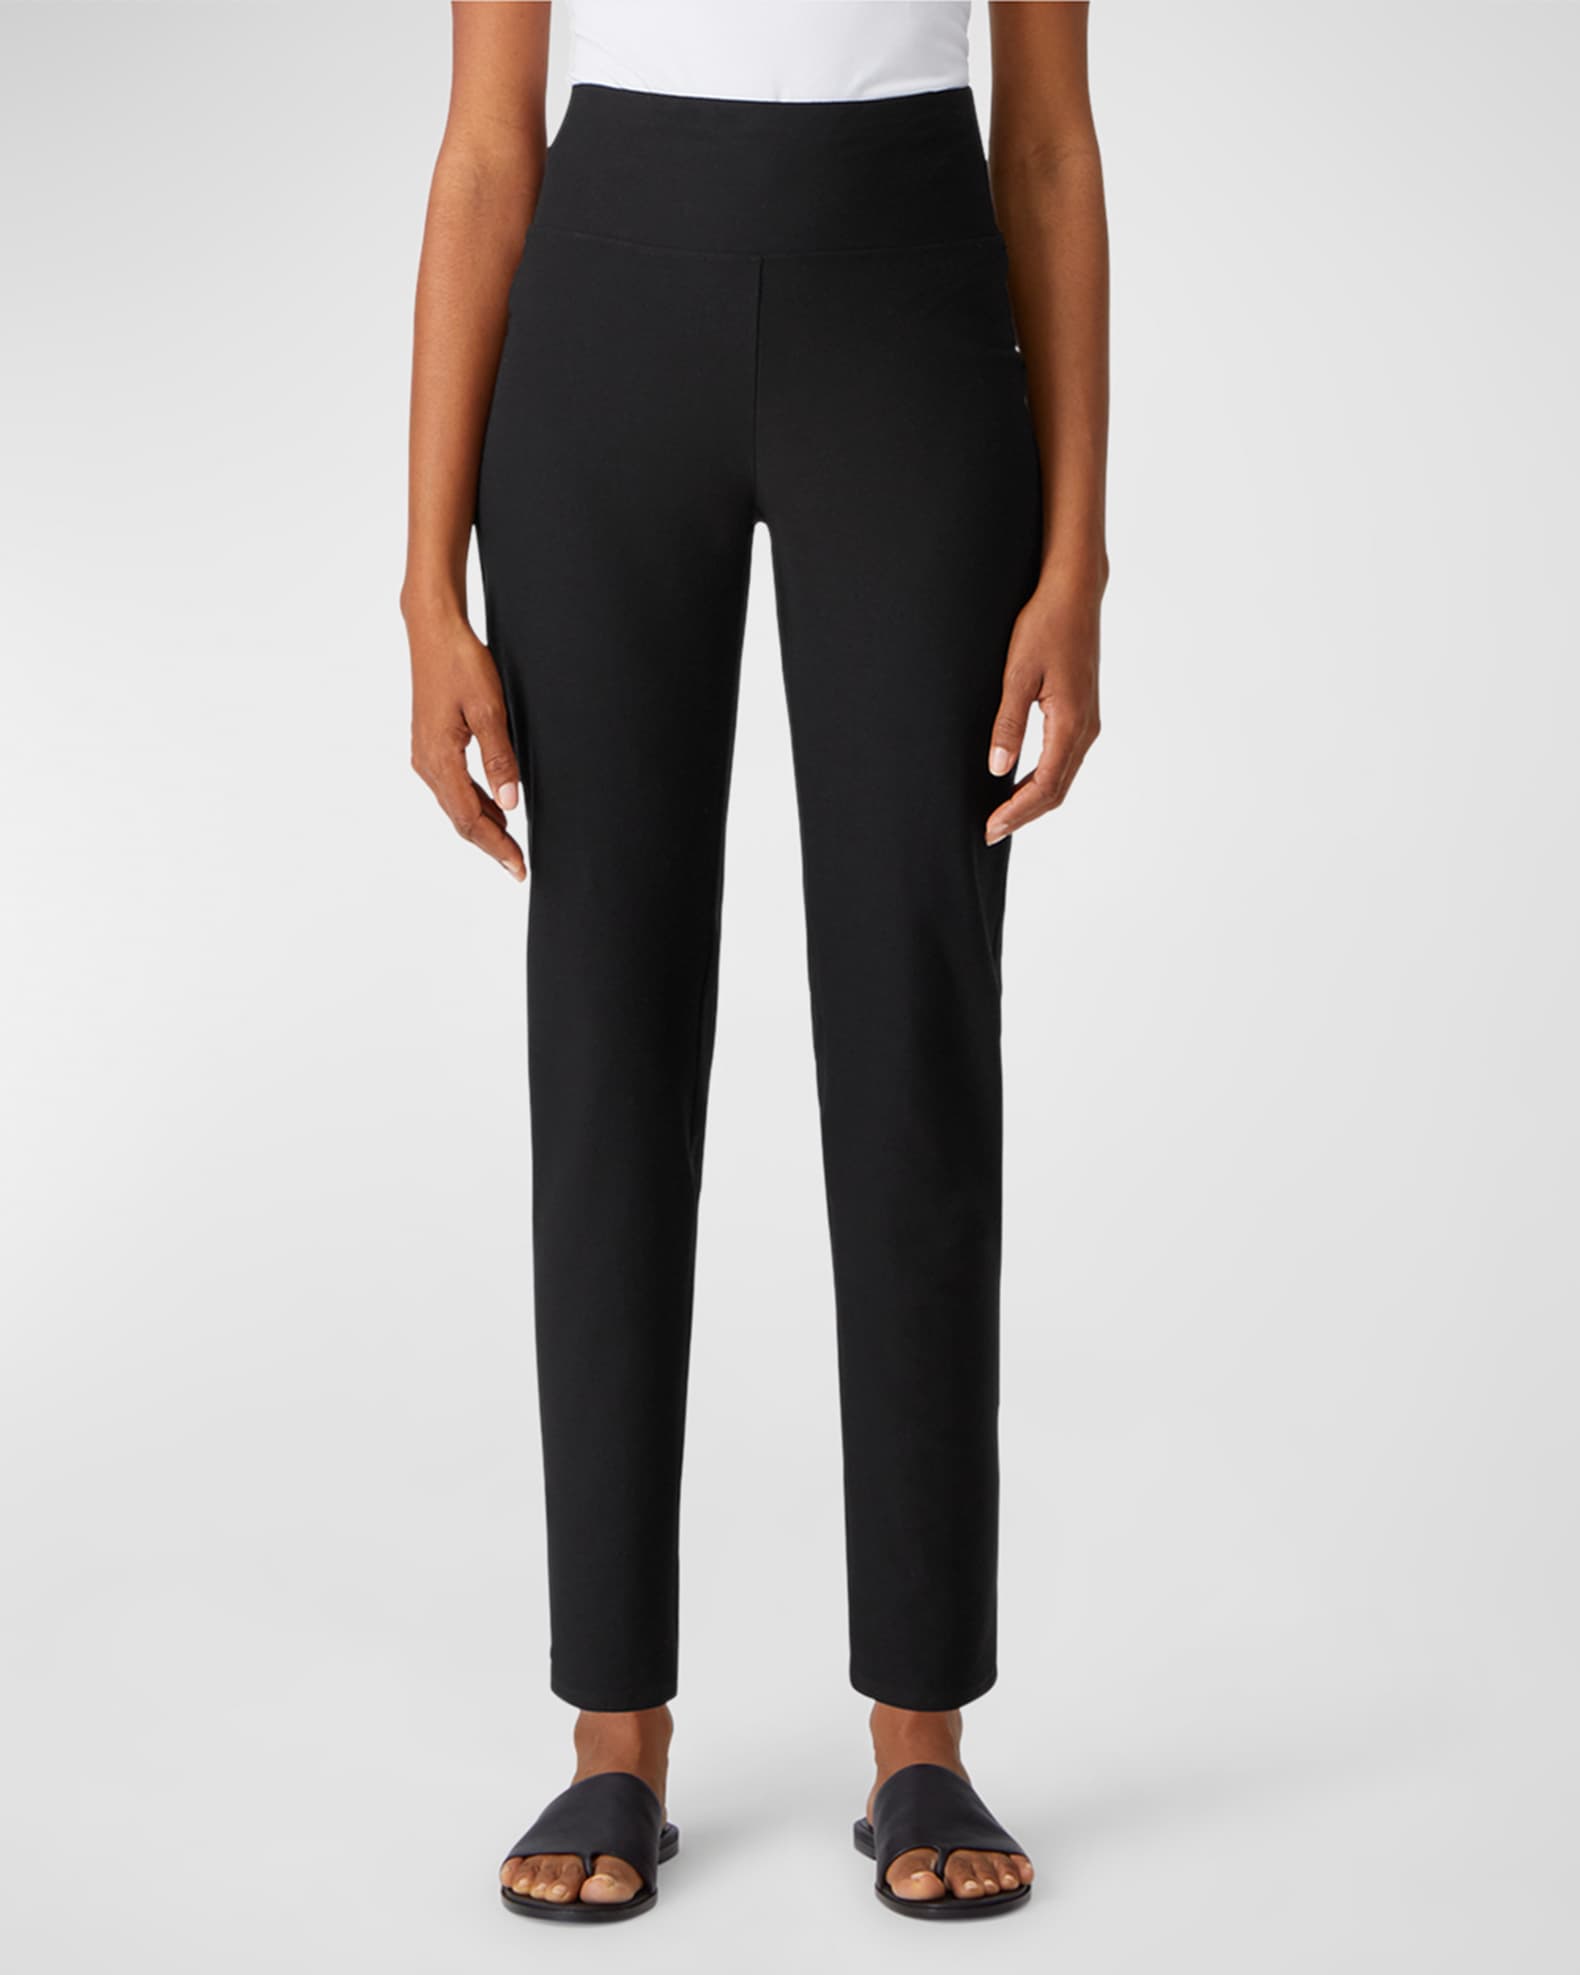 Eileen Fisher High-Waist Stretch Crepe Slim Ankle Pants | Neiman Marcus